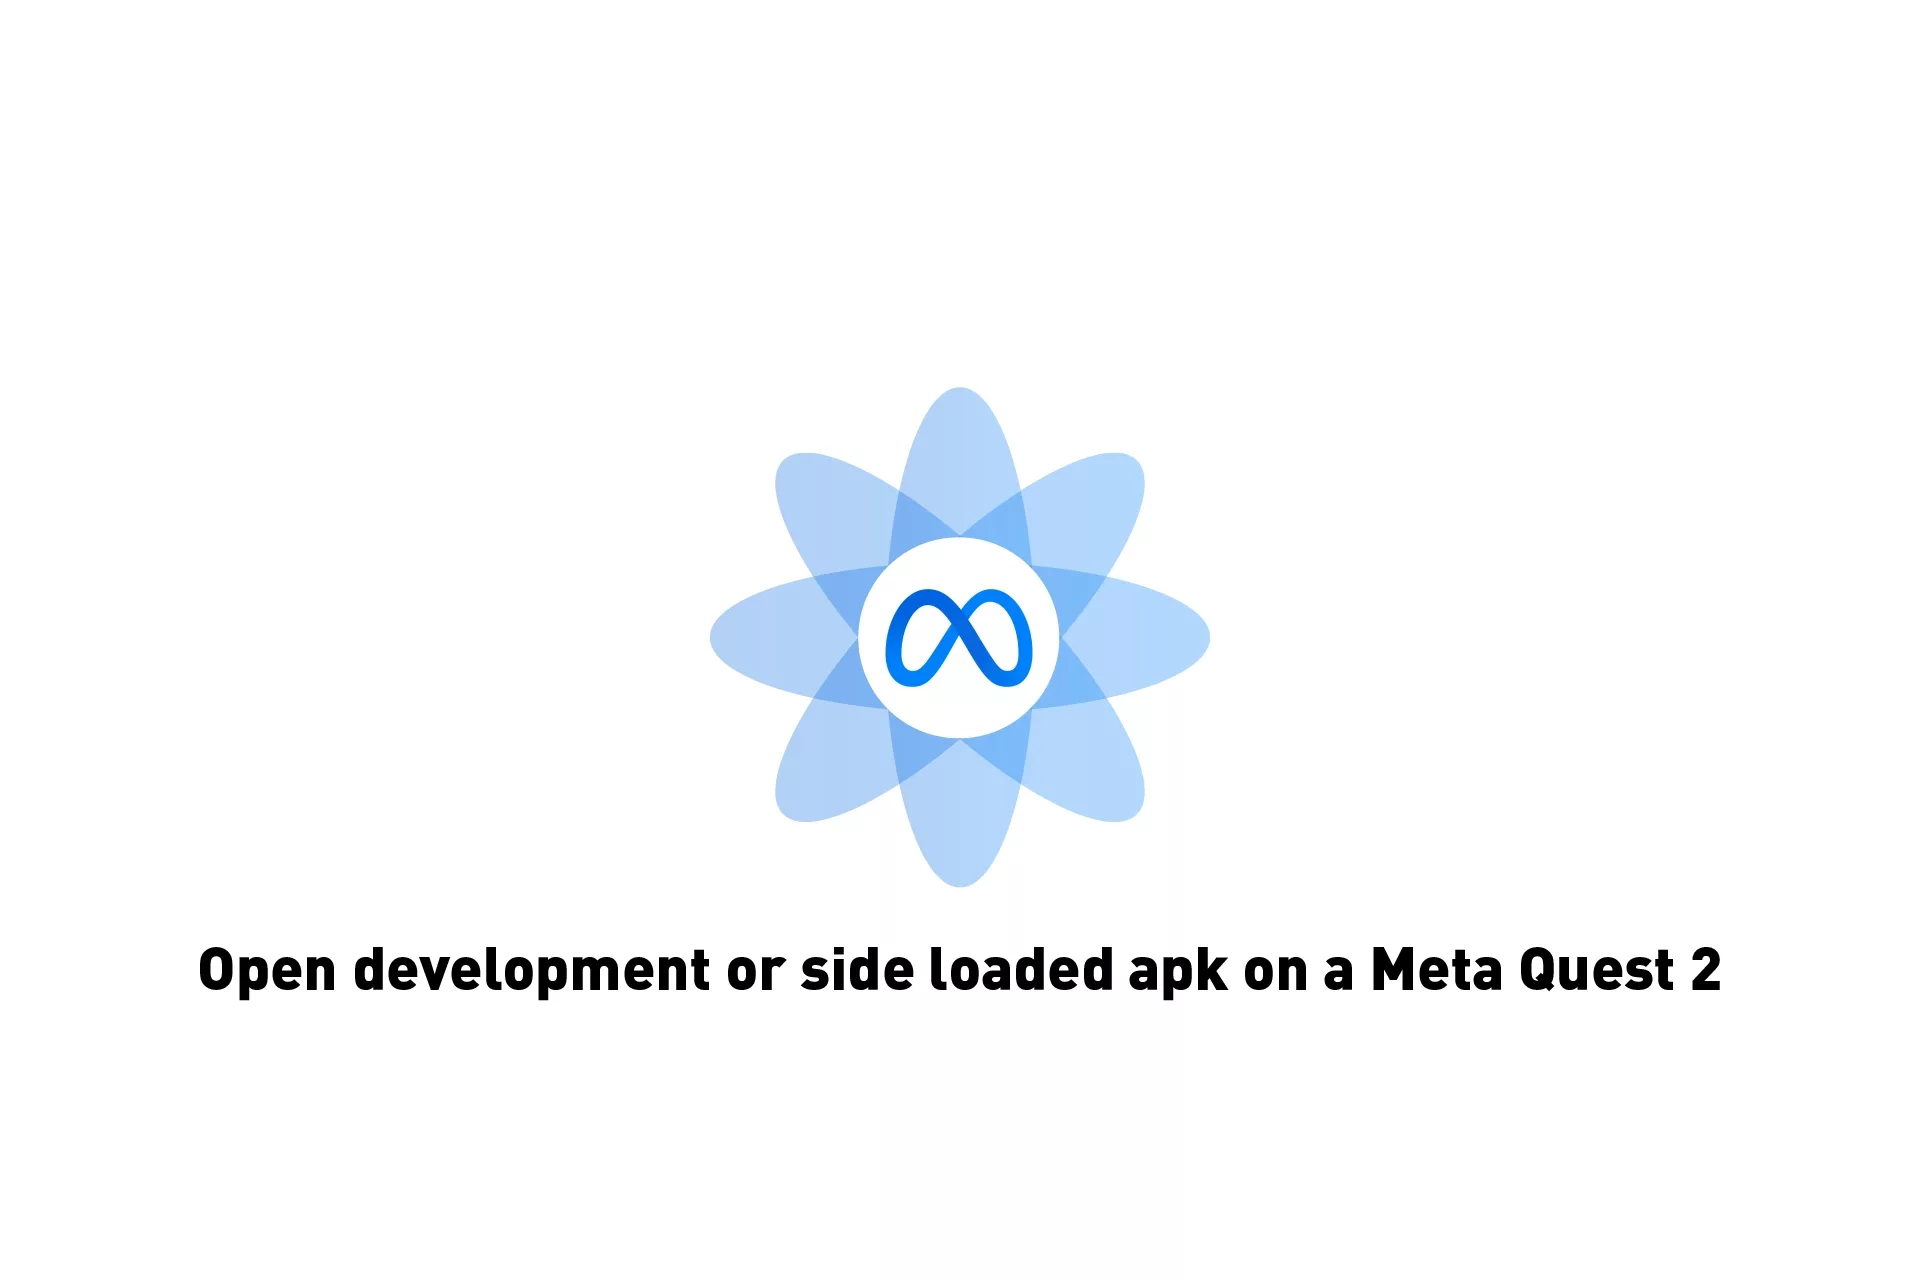 A flower that represents Meta with the text "Open development or side loaded apk on a Meta Quest 2" beneath it.